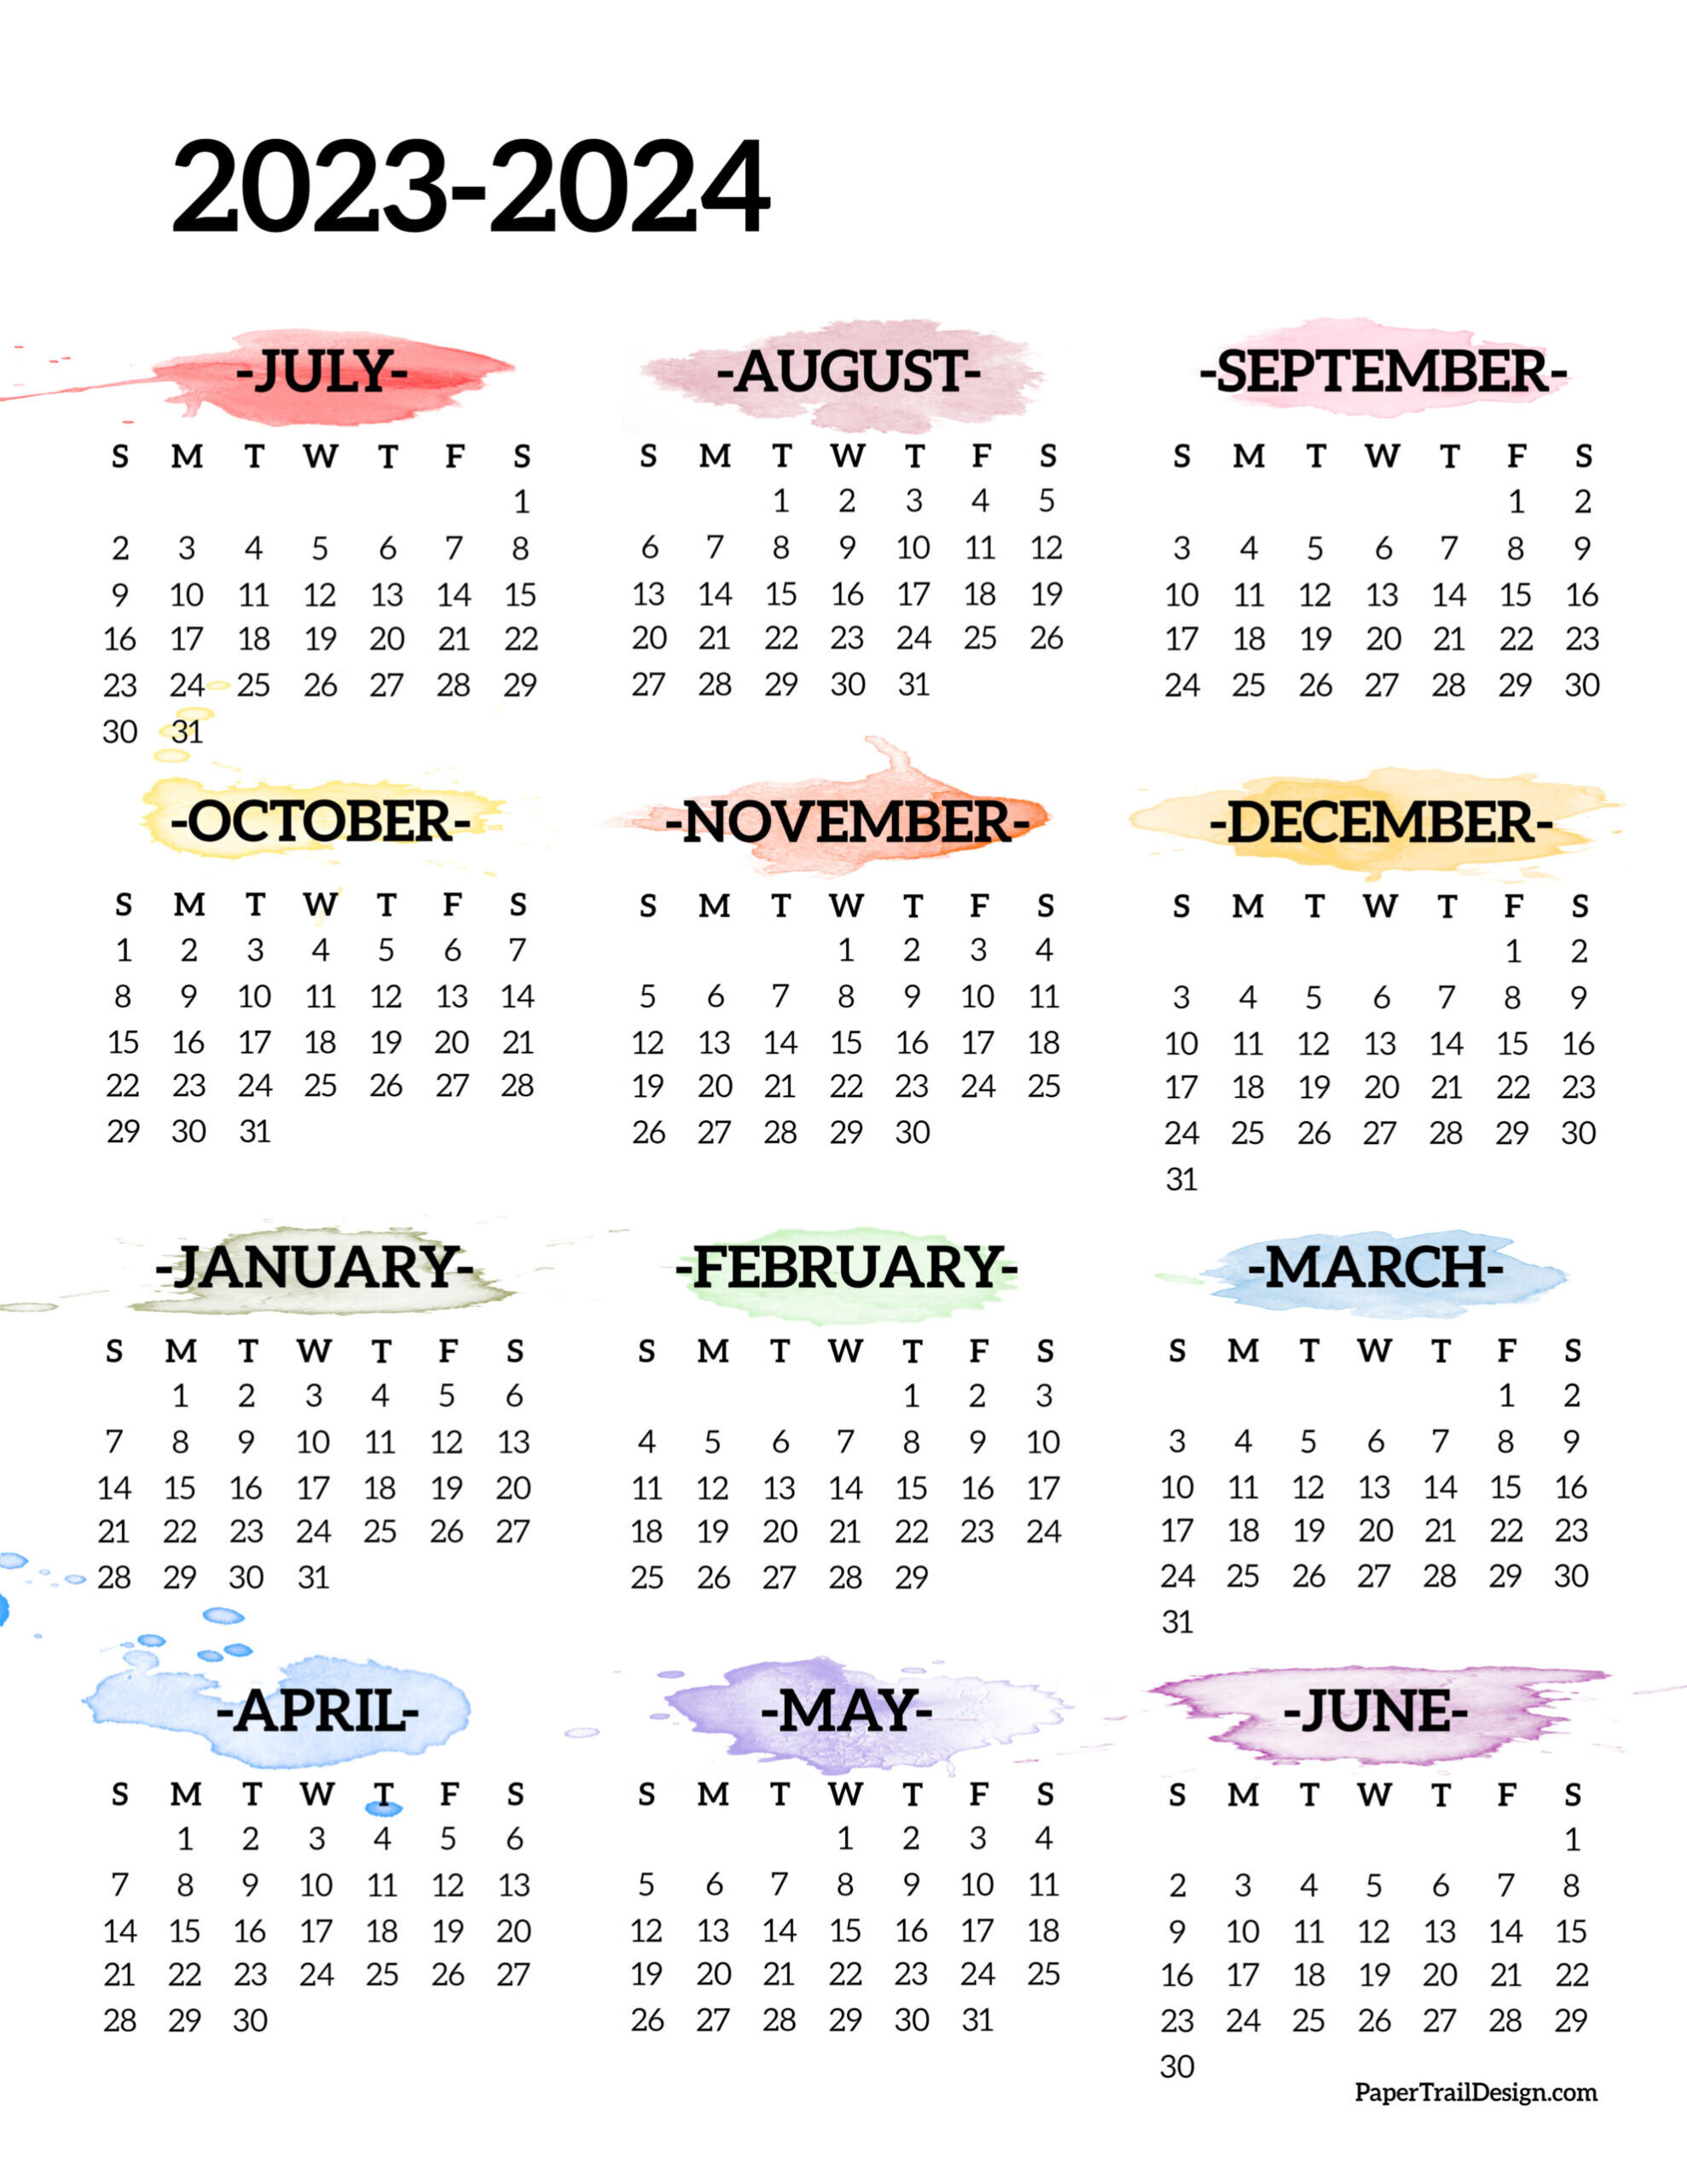 2023-2024 School Year Calendar Free Printable - Paper Trail Design with Calendar August 2023 - July 2024